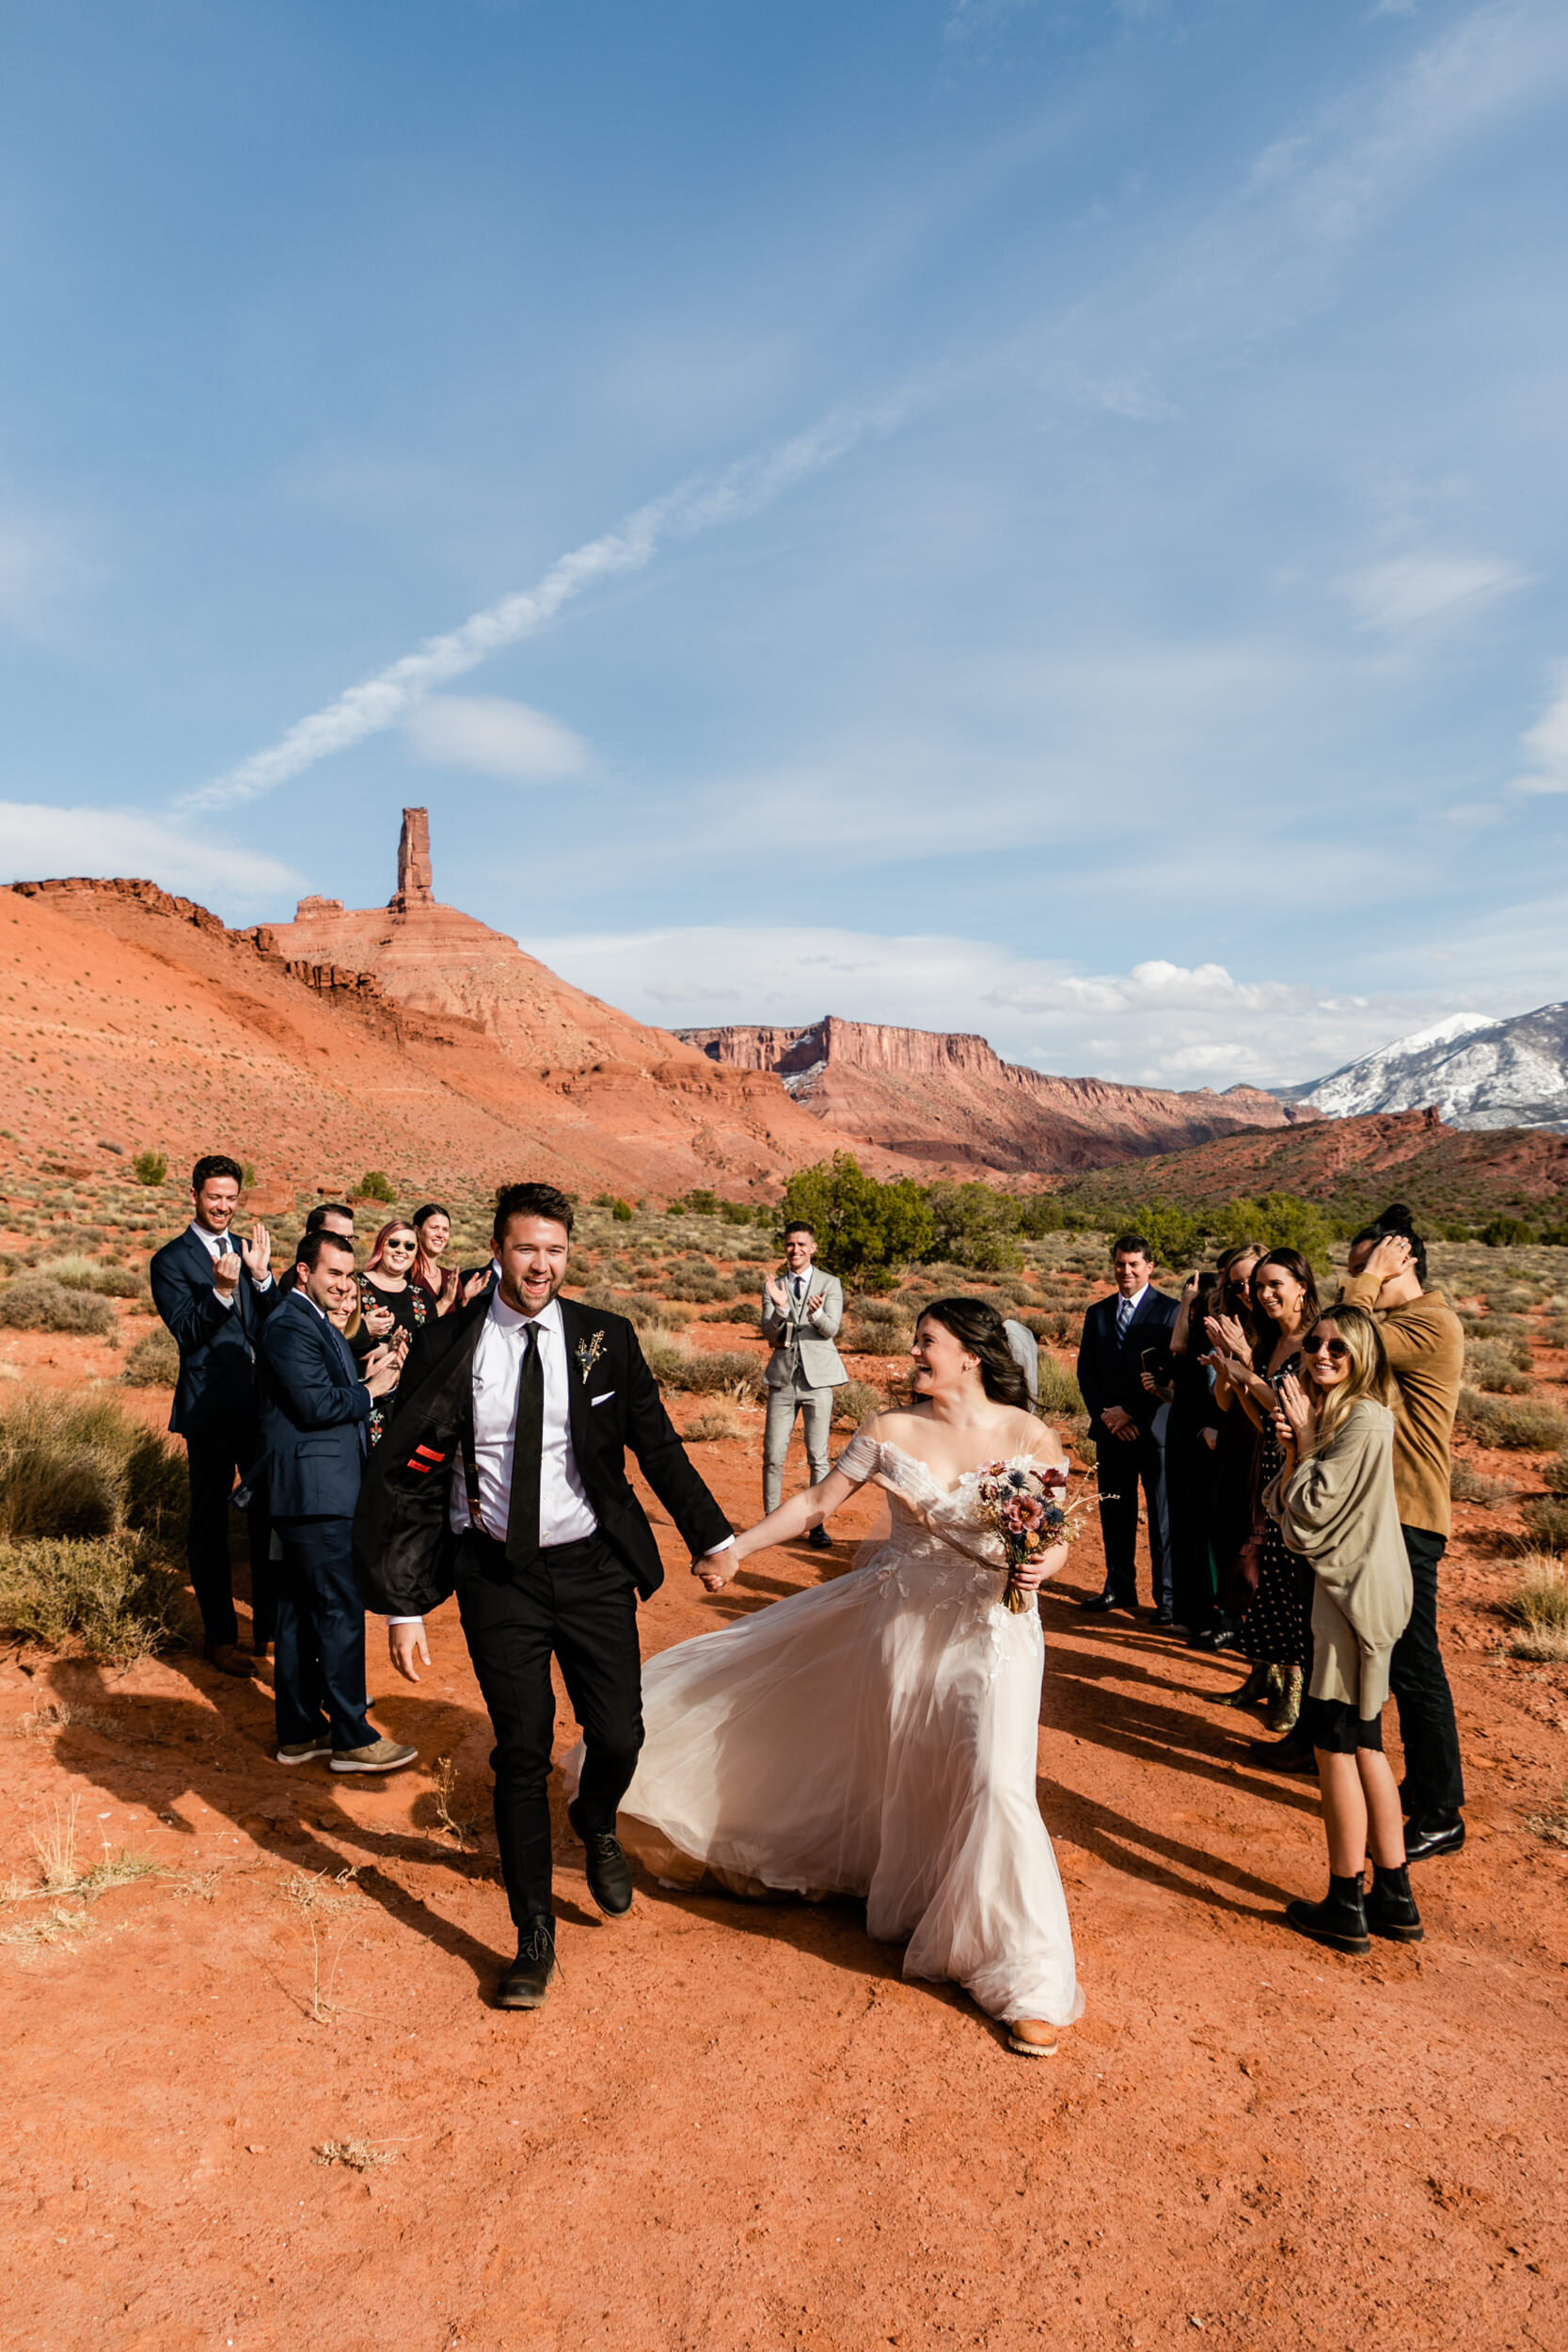 Moab Utah Elopement | Small Family Wedding Inspiration | The Hearnes Photography